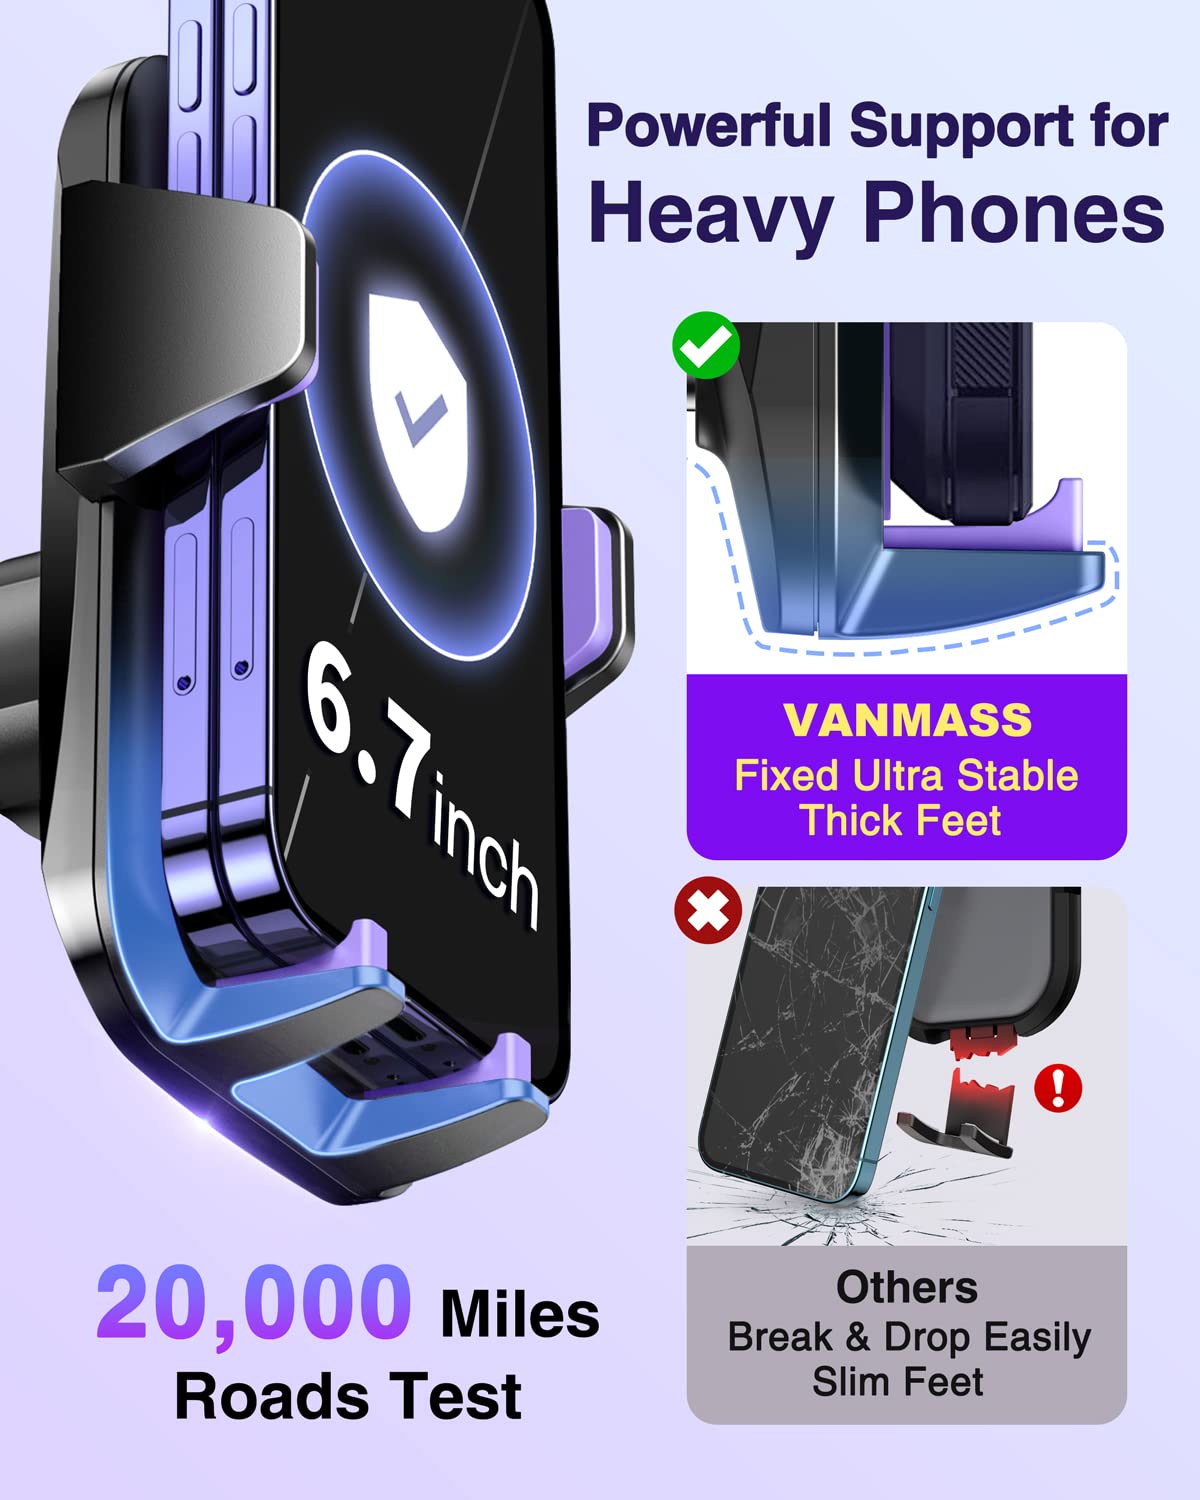 VANMASS Universal Car Phone Mount,【Patent & Safety Certs】 Upgraded Handsfree Dashboard Stand, Phone Holder for Car Windshield Vent, Compatible iPhone 14 13 12 11 Pro Max Xs XR X, Galaxy (Purple)